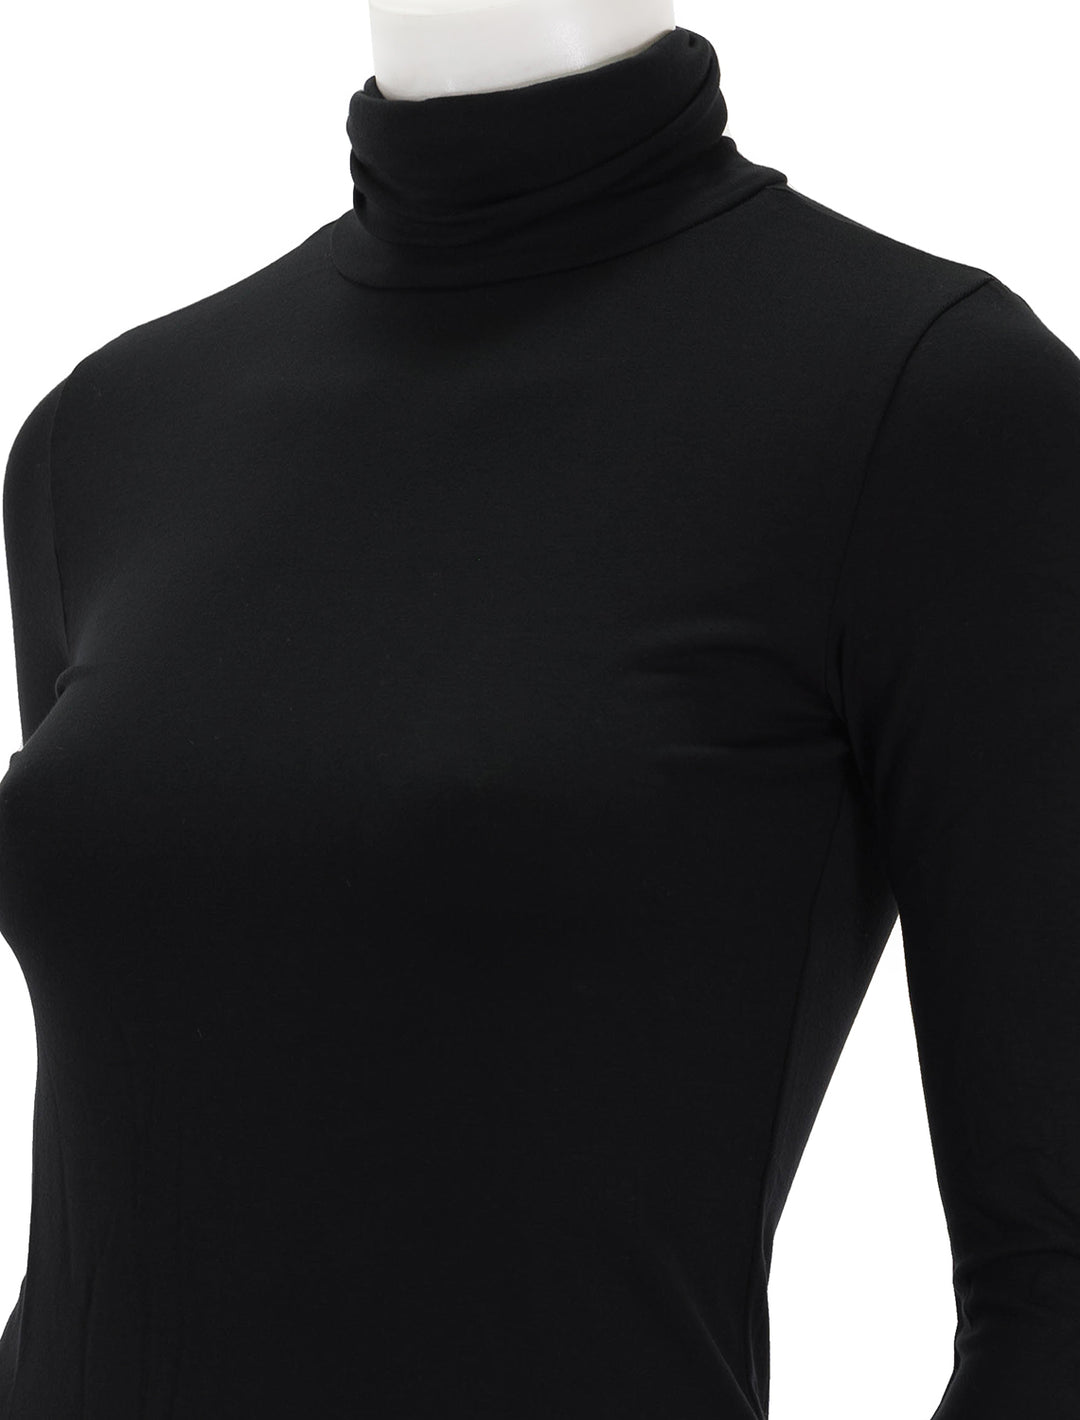 Close-up view of L'agence's aja modal turtleneck in black.